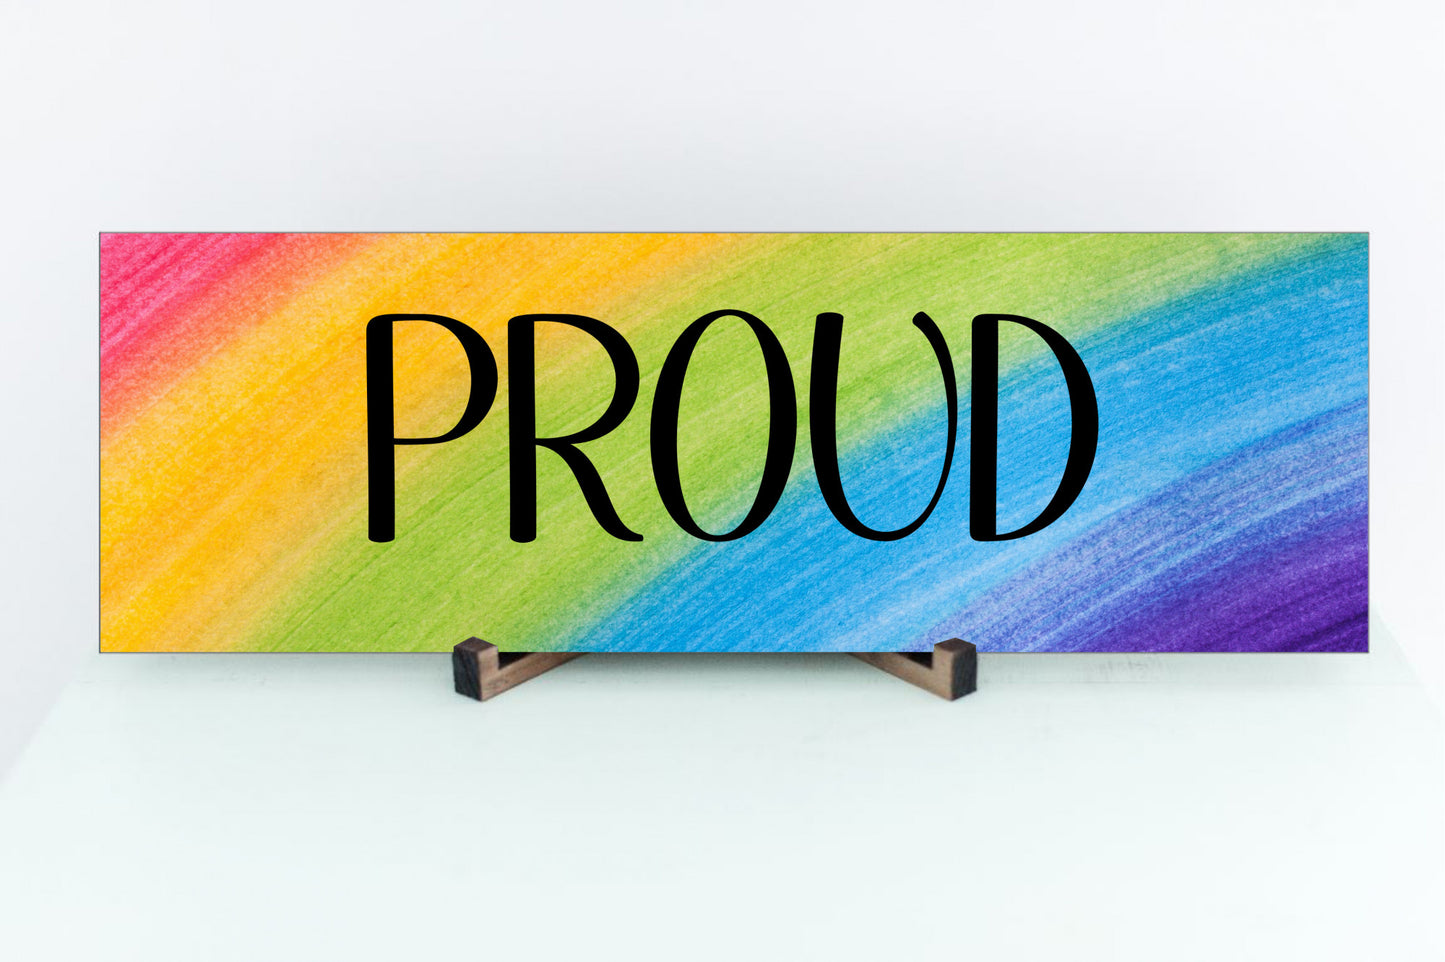 Proud Rainbow Design Sign for Wall or Tabletop Display